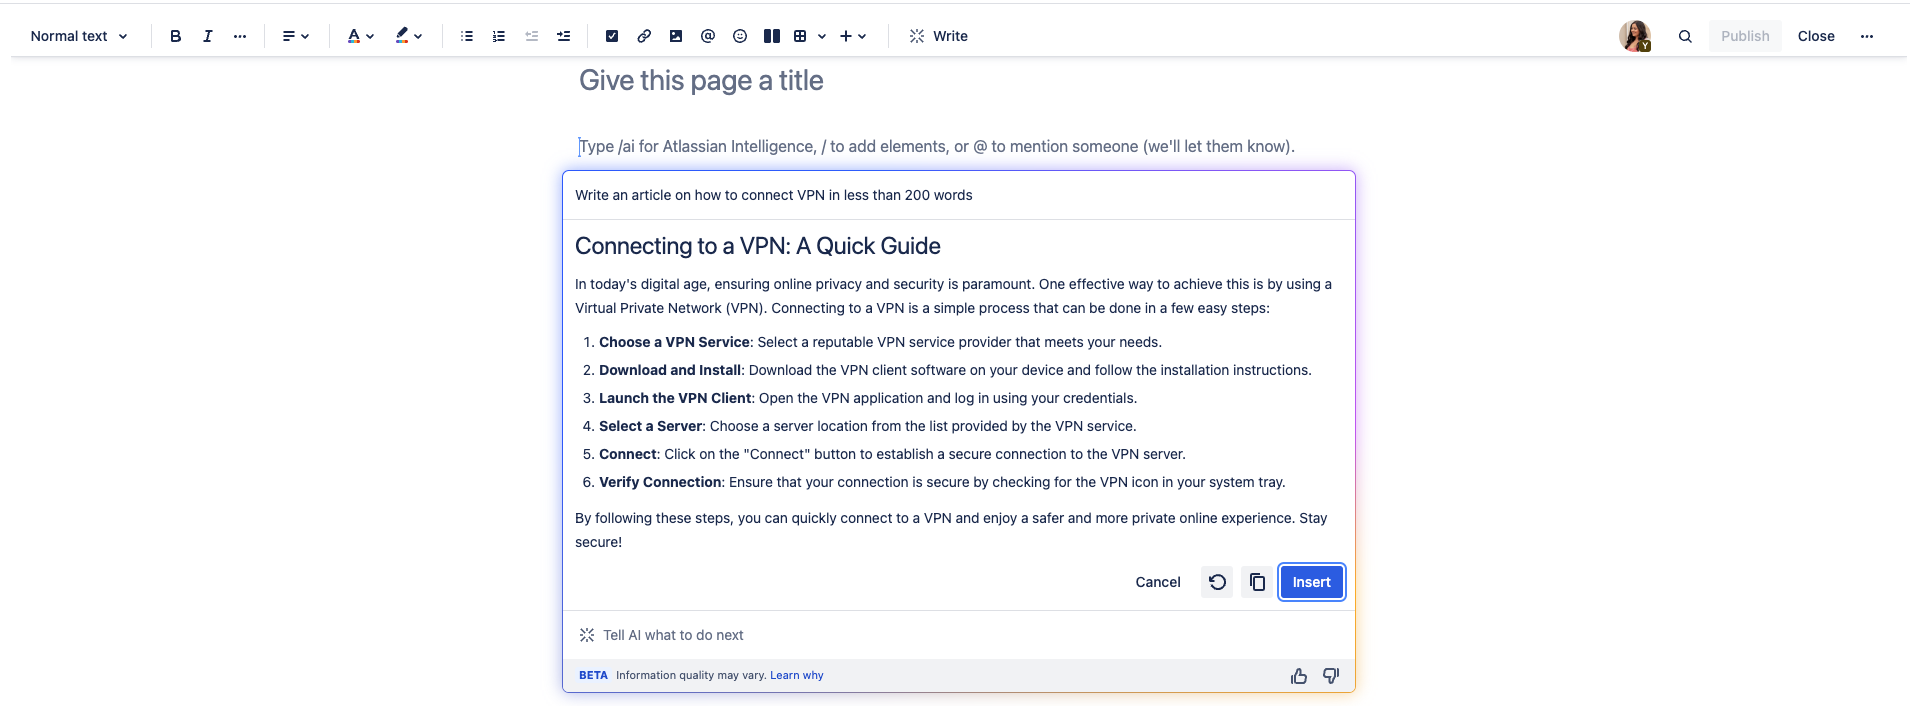 Draft content of a knowledge base article on how to connect VPN